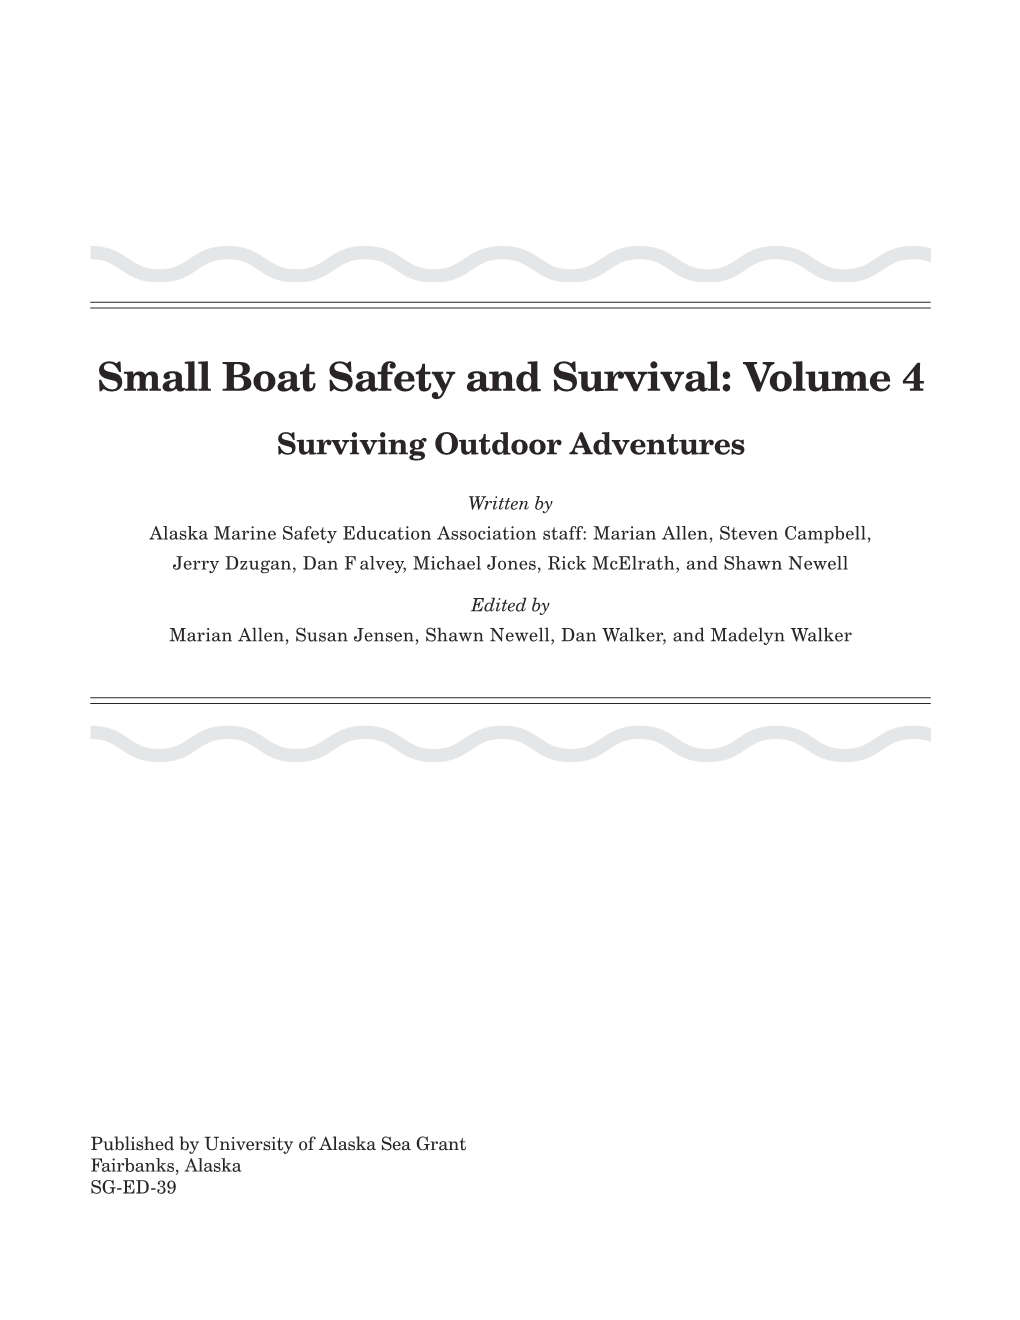 Small Boat Safety & Survival